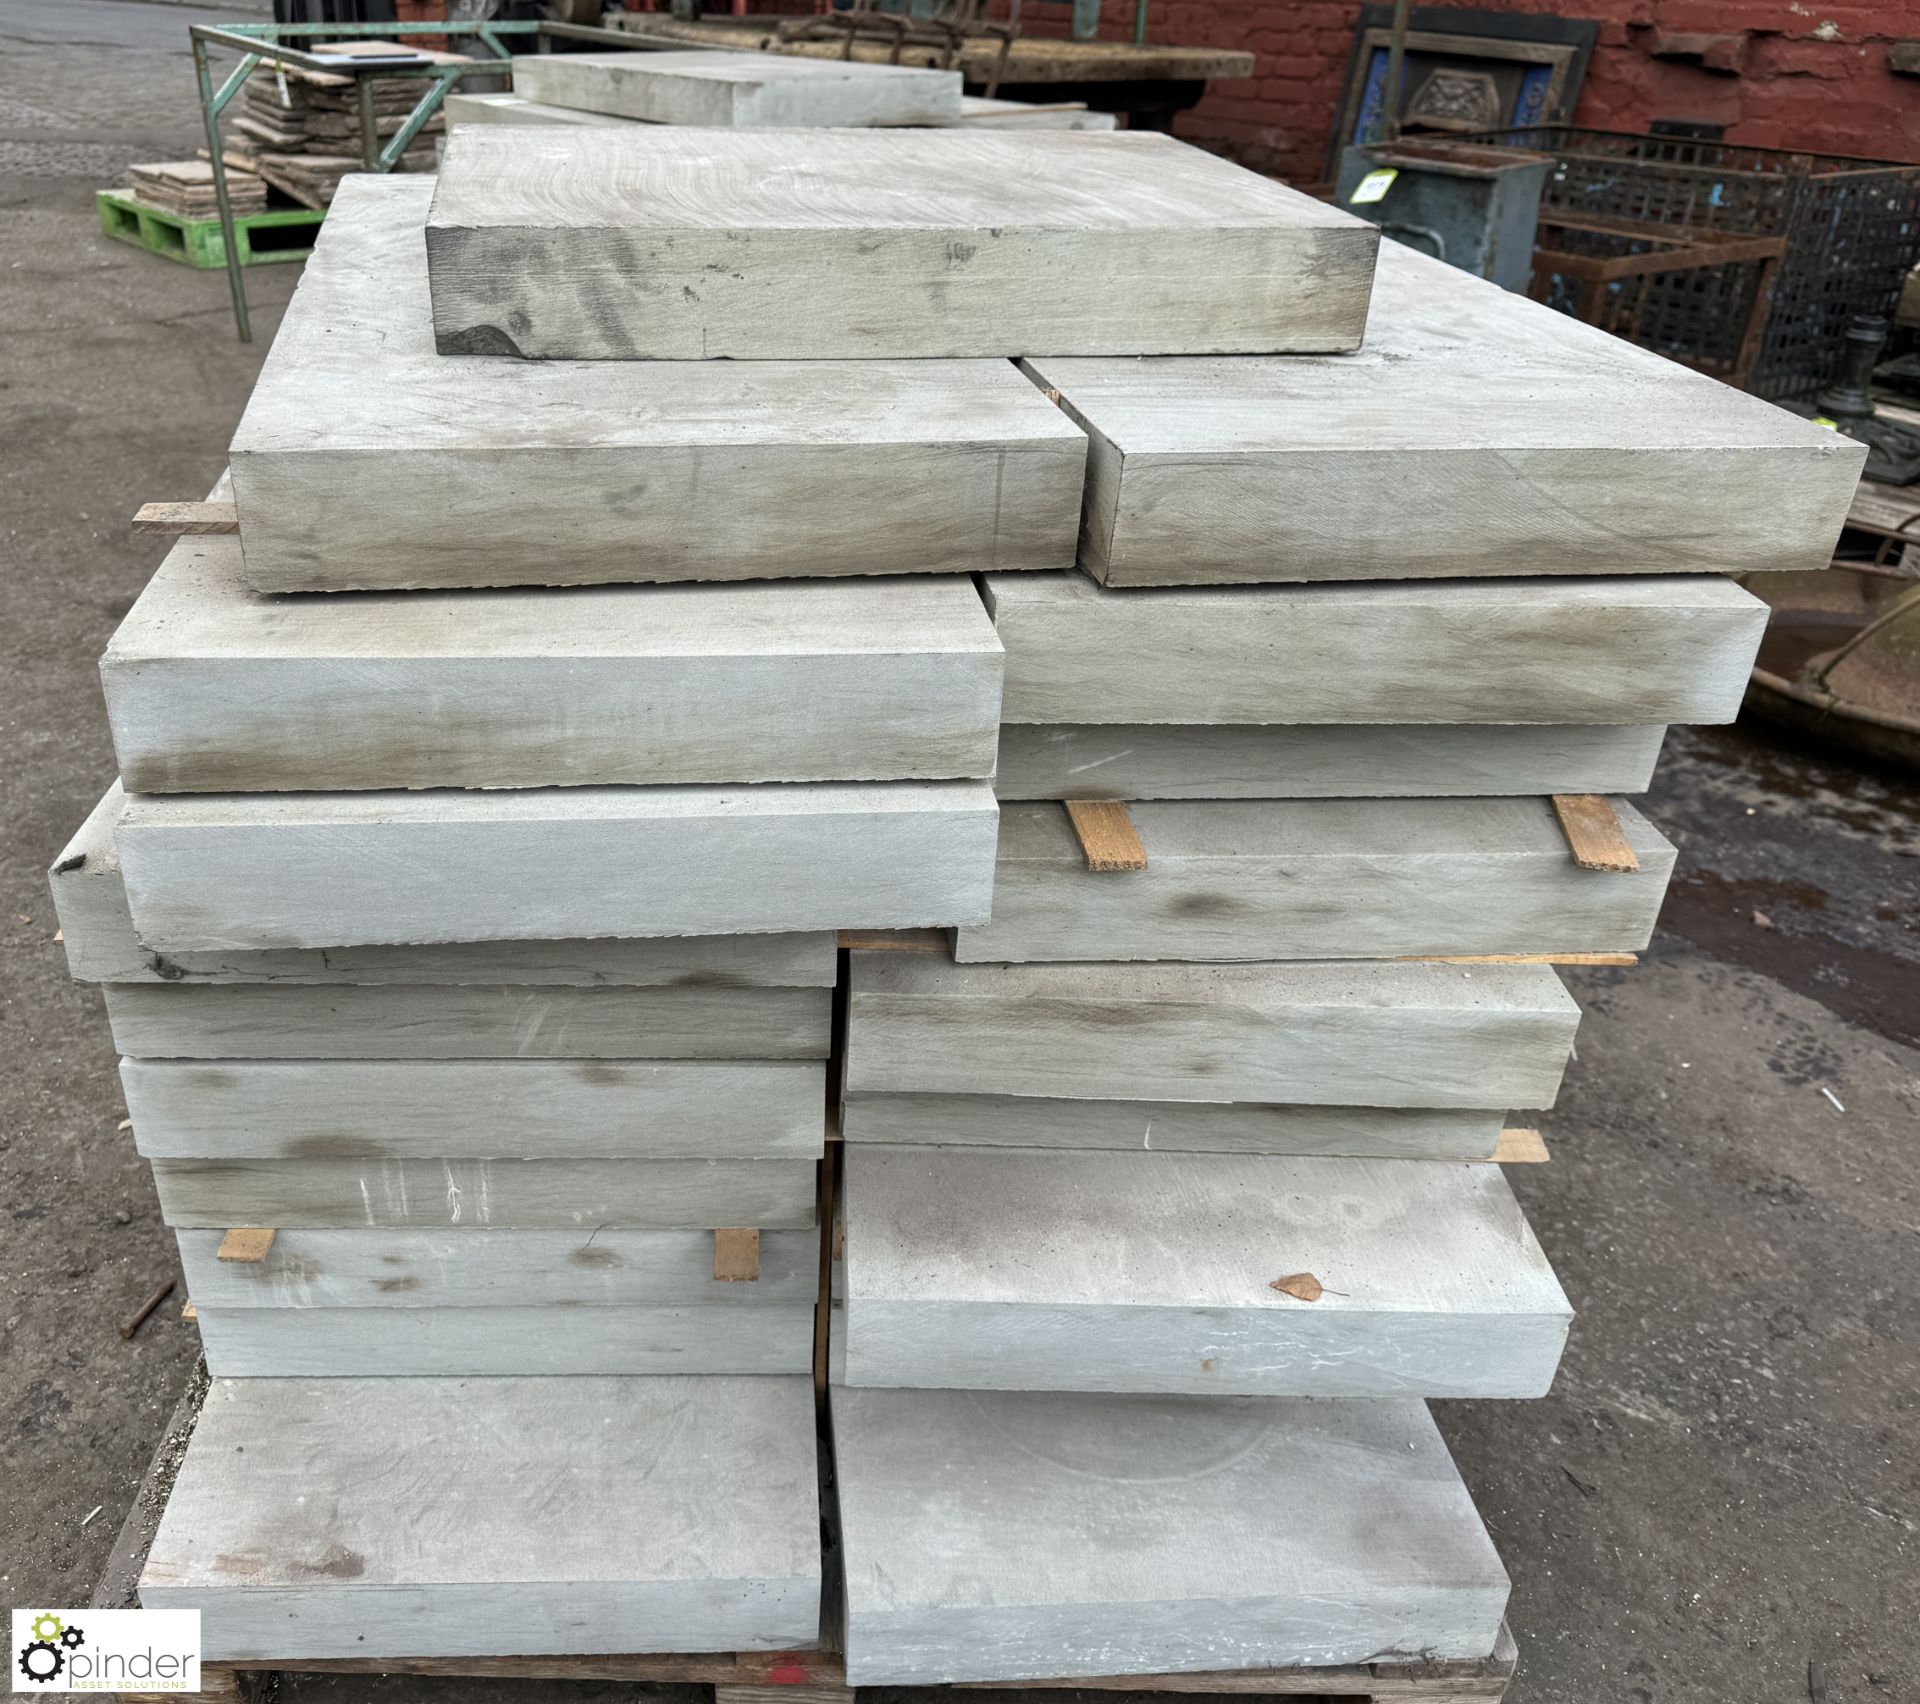 Pallet Sandstone Slabs from Millstone grit, various lengths x 450mm x 75mm - Image 3 of 6